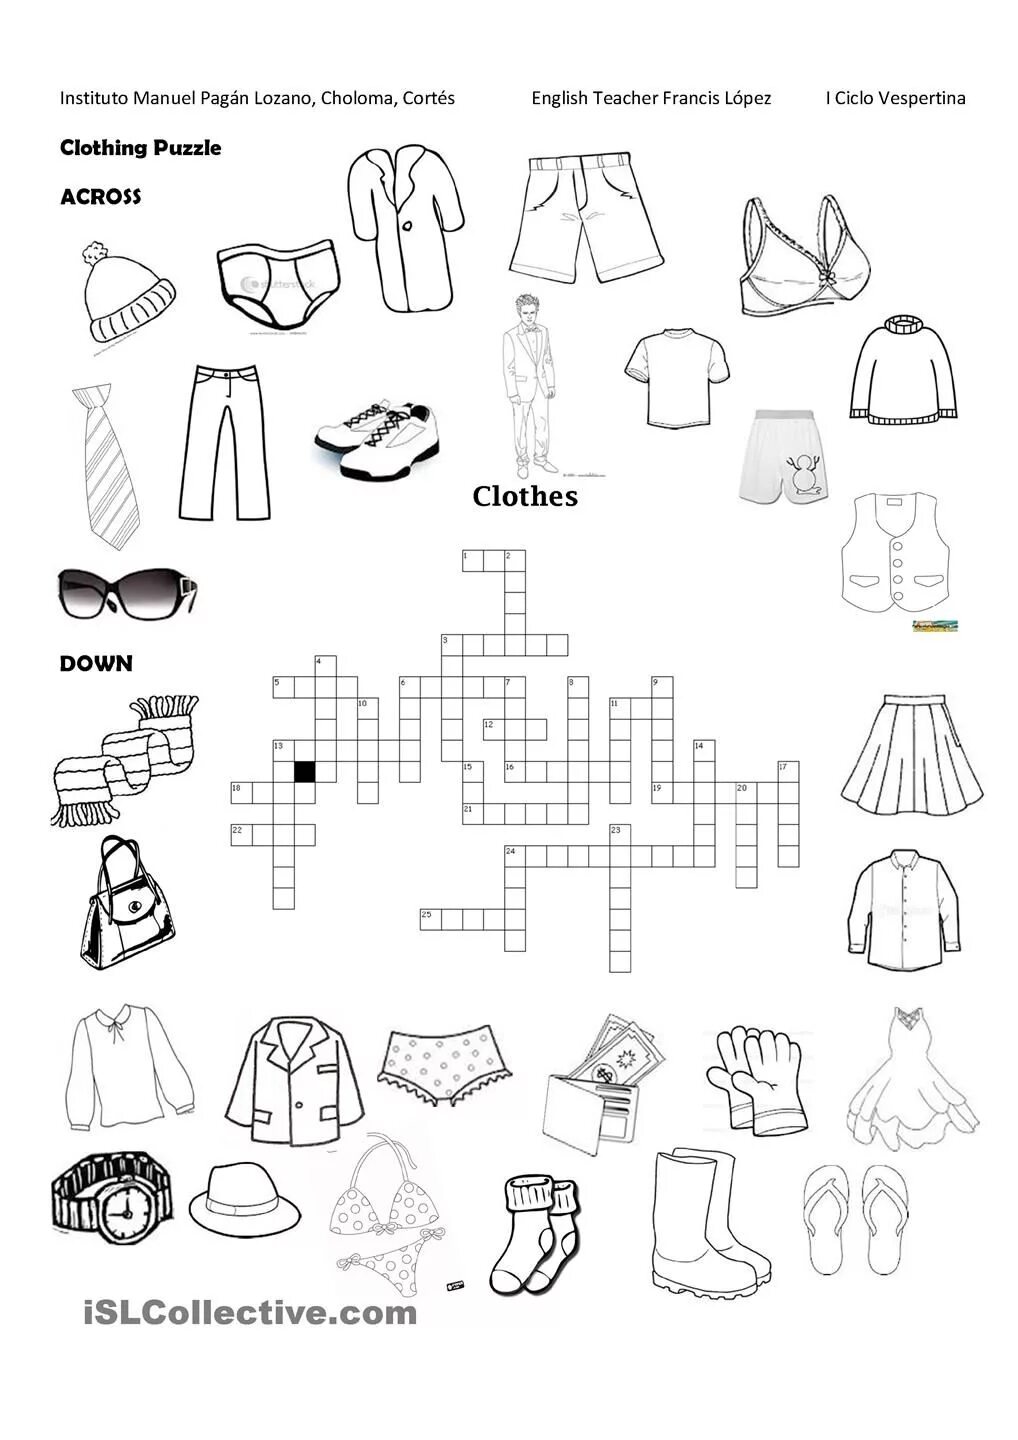 Clothes worksheets for kids. Кроссворд одежда на английском. Puzzles clothes для детей. Clothes crossword for Kids. Английский язык clothes and Accessories Wordsearch Puzzle.